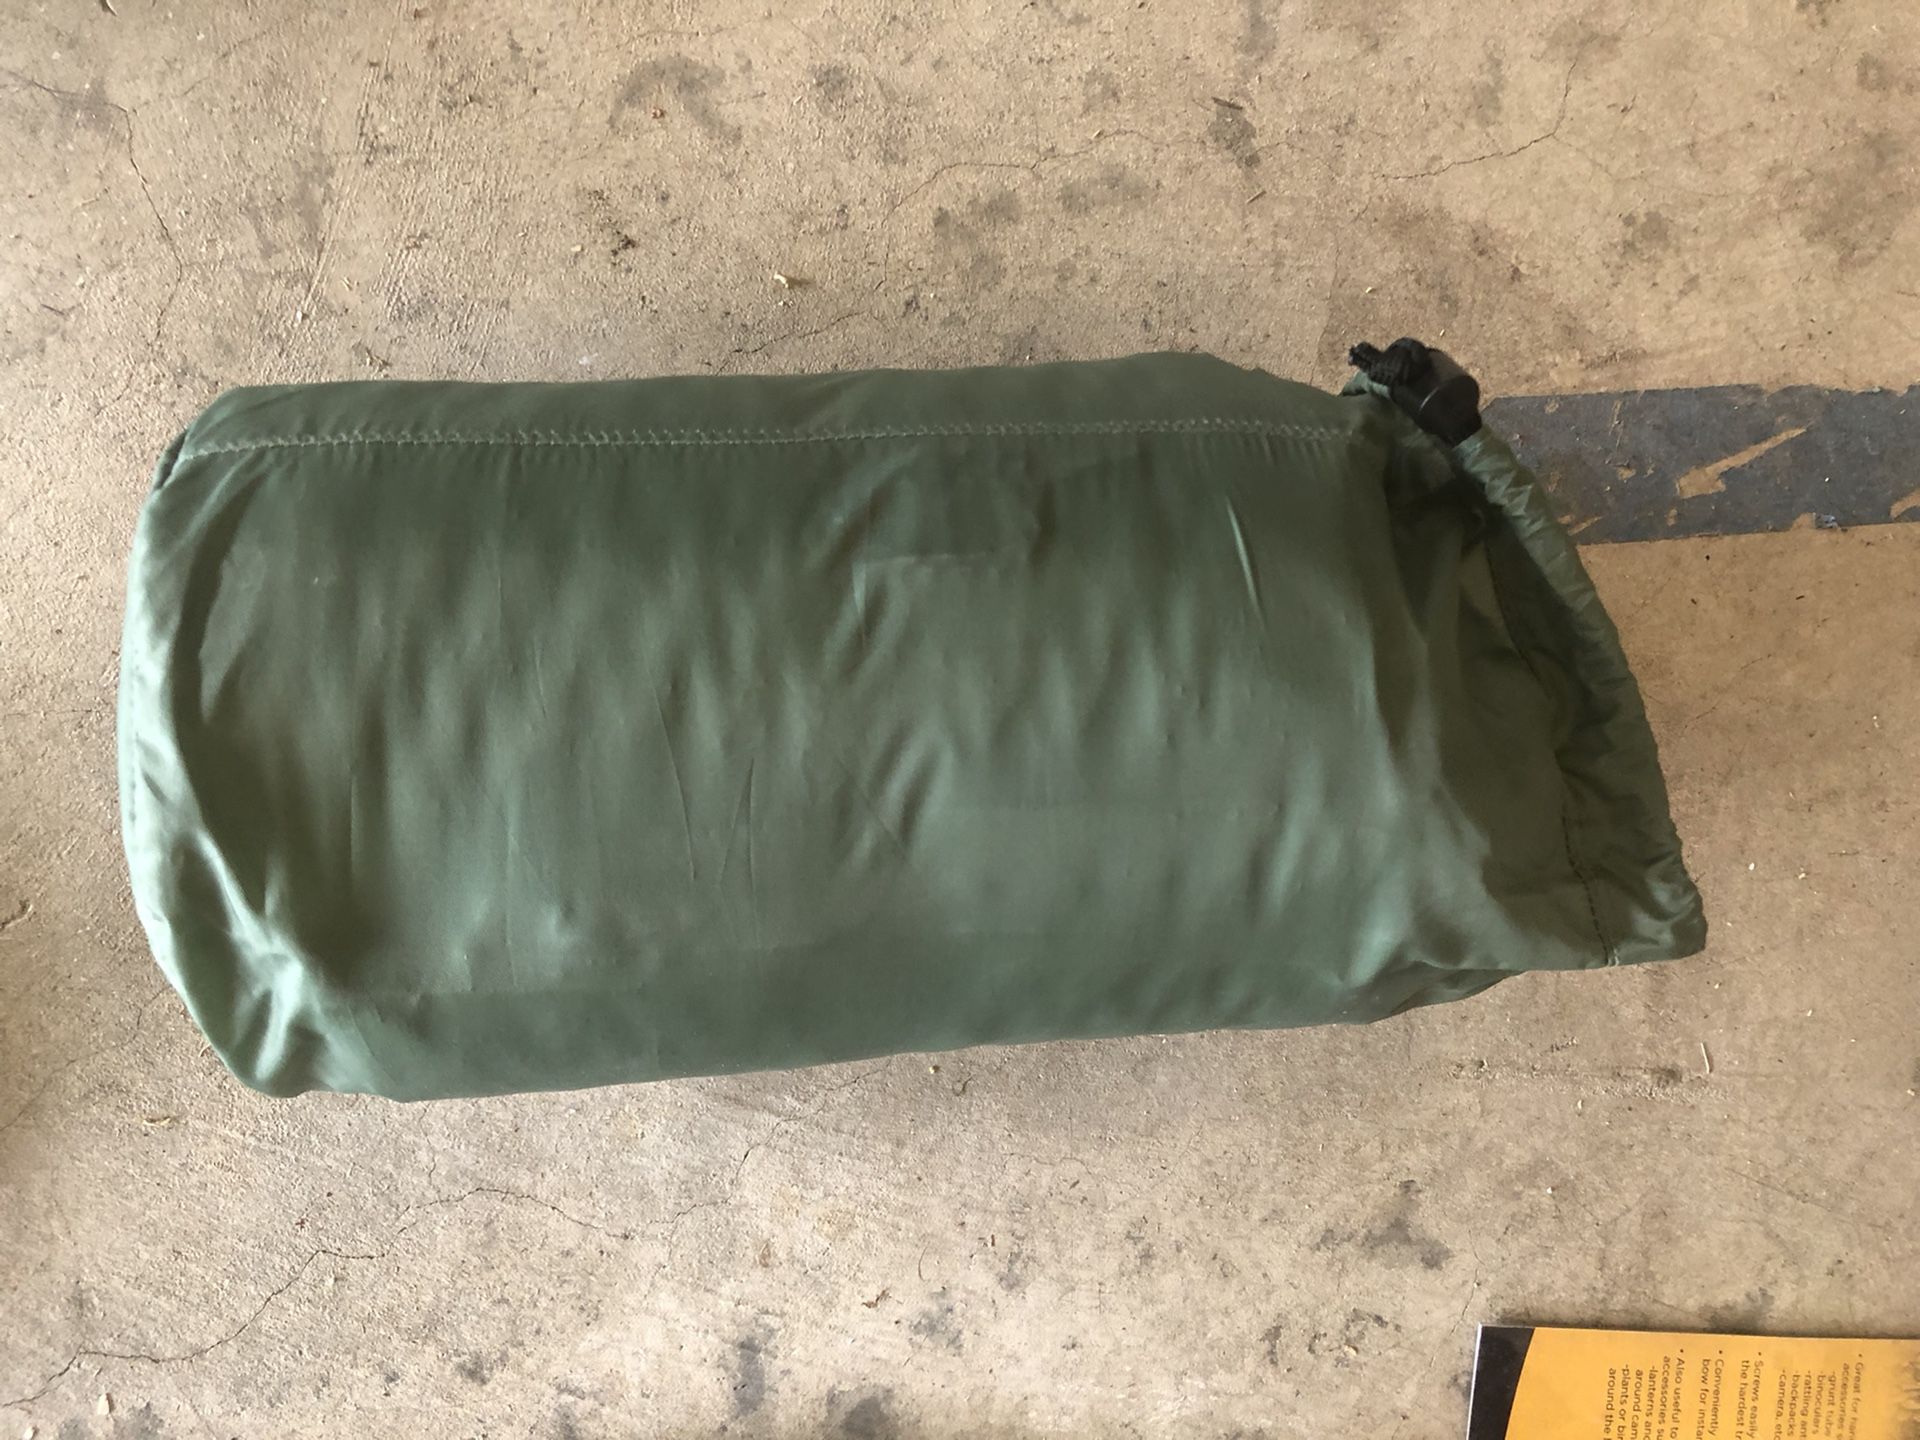 Backpack thermorest air mattress